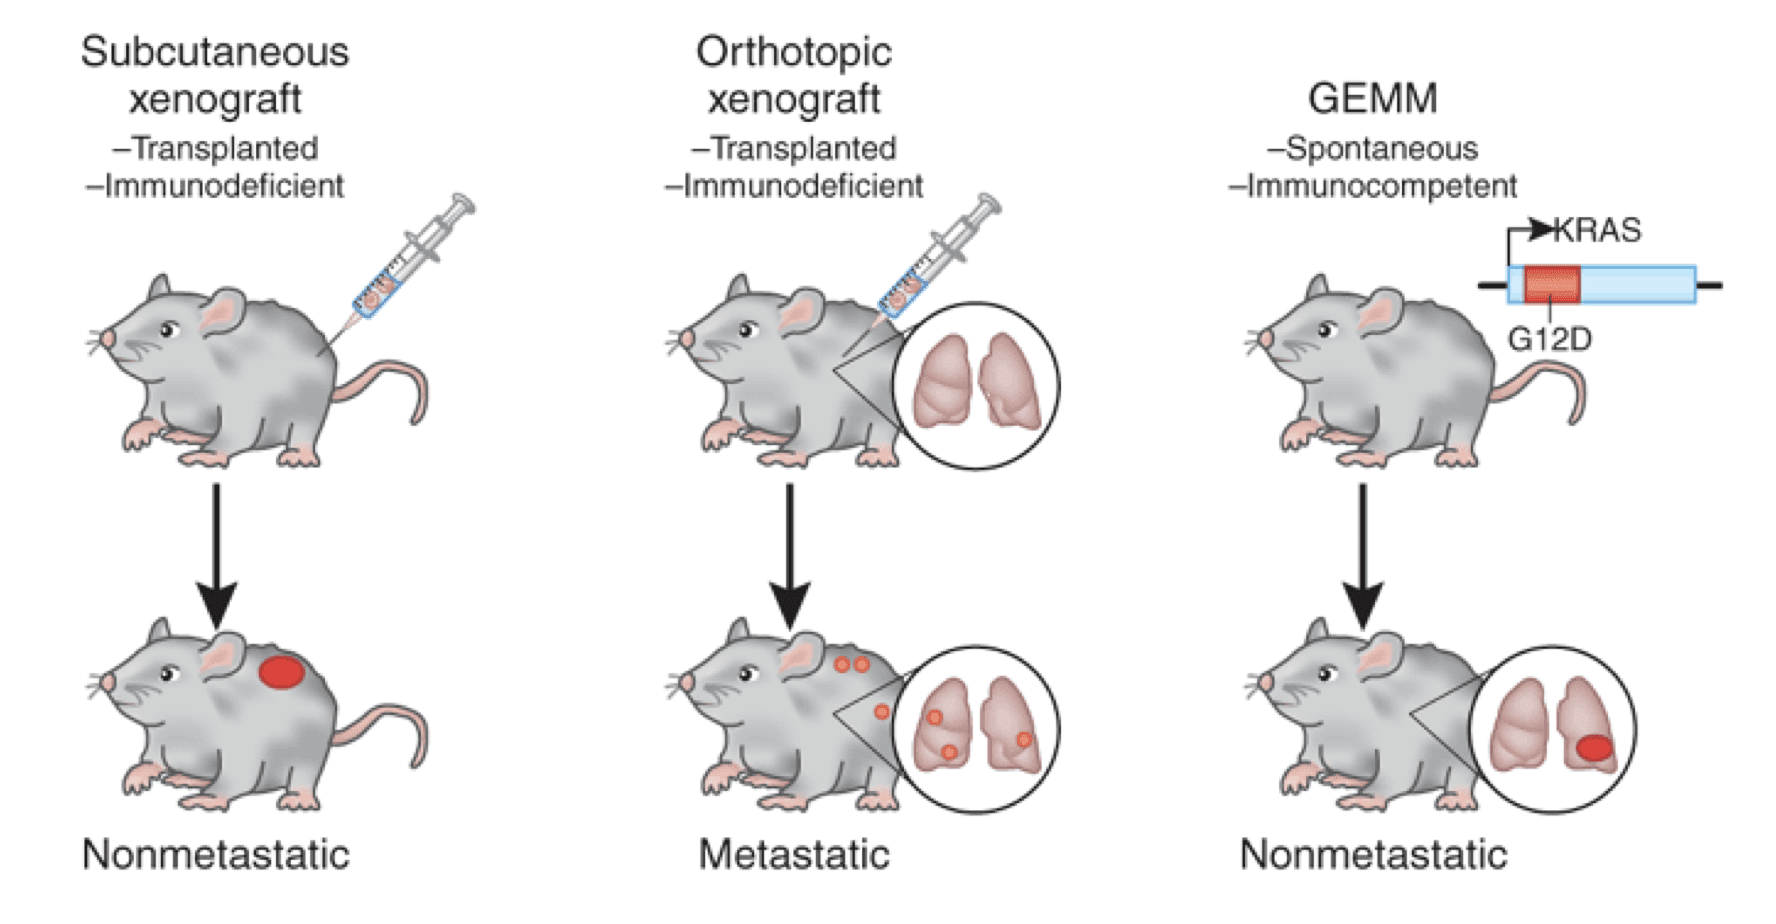  Development processes of xenograft tumor and GEM models in mice. Xenograft model: Subcutaneously injection of tumor cell line or directly implantation of patient-derived tissue into immunedeficient mouse. GEM model: mouse genetic profile is altered and leads to carcinomatous condition and react therapeutic treatments.